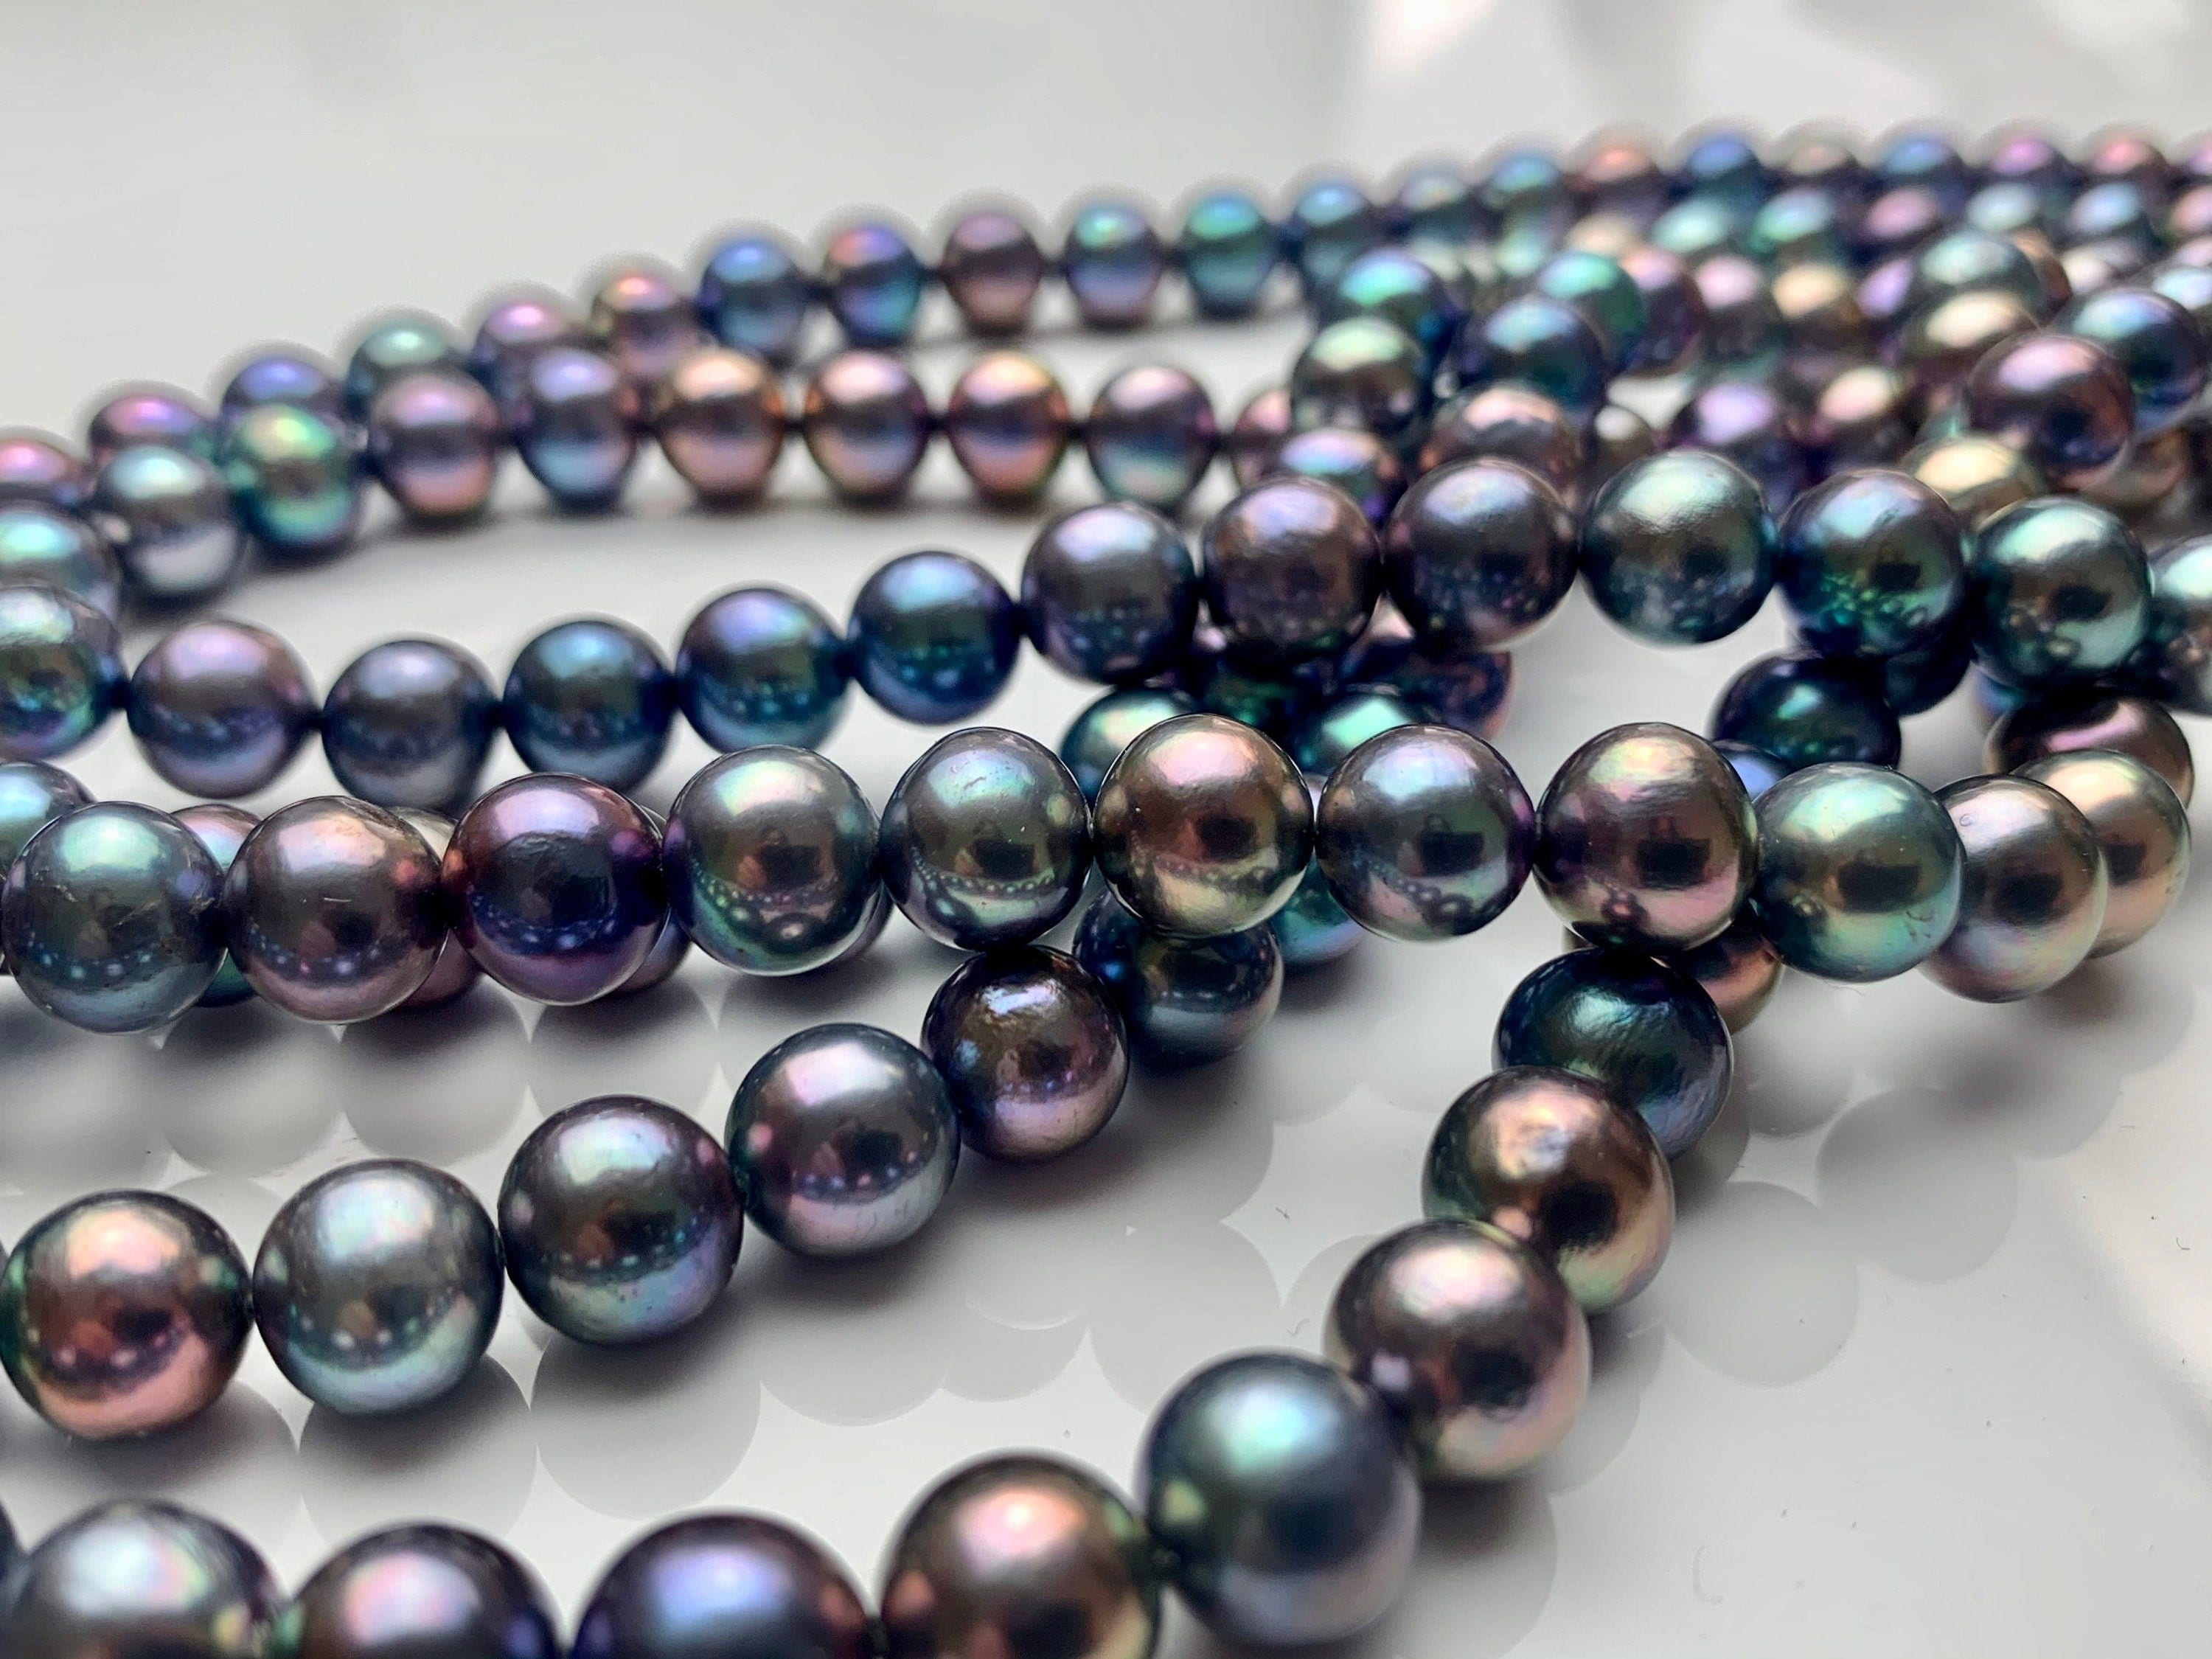 8-8.5 Mm AAA Gray Semi-round Freshwater Pearls Genuine Smooth and Round  Pearl Beads High Luster Pinkish Gray Color Freshwater Pearls 535 